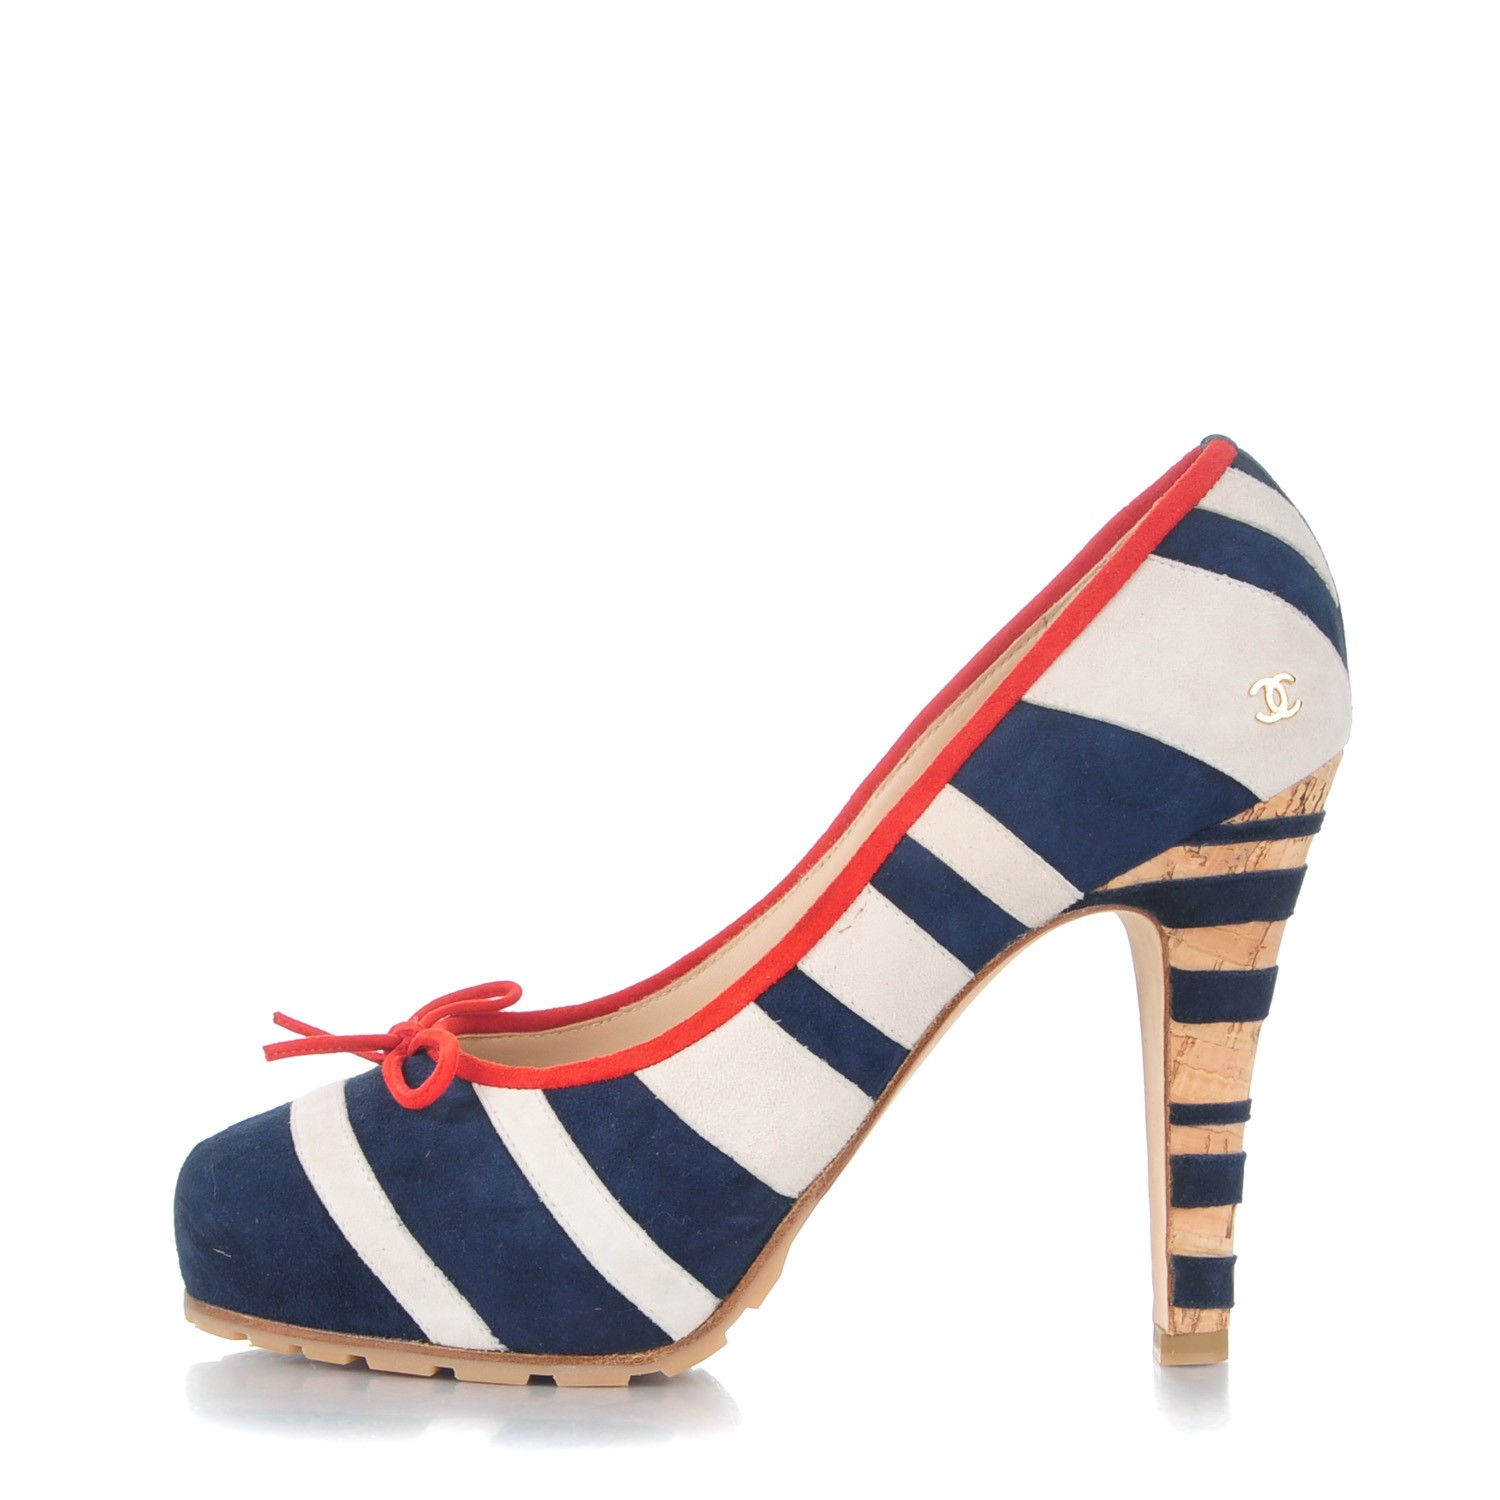 blue and white striped pumps